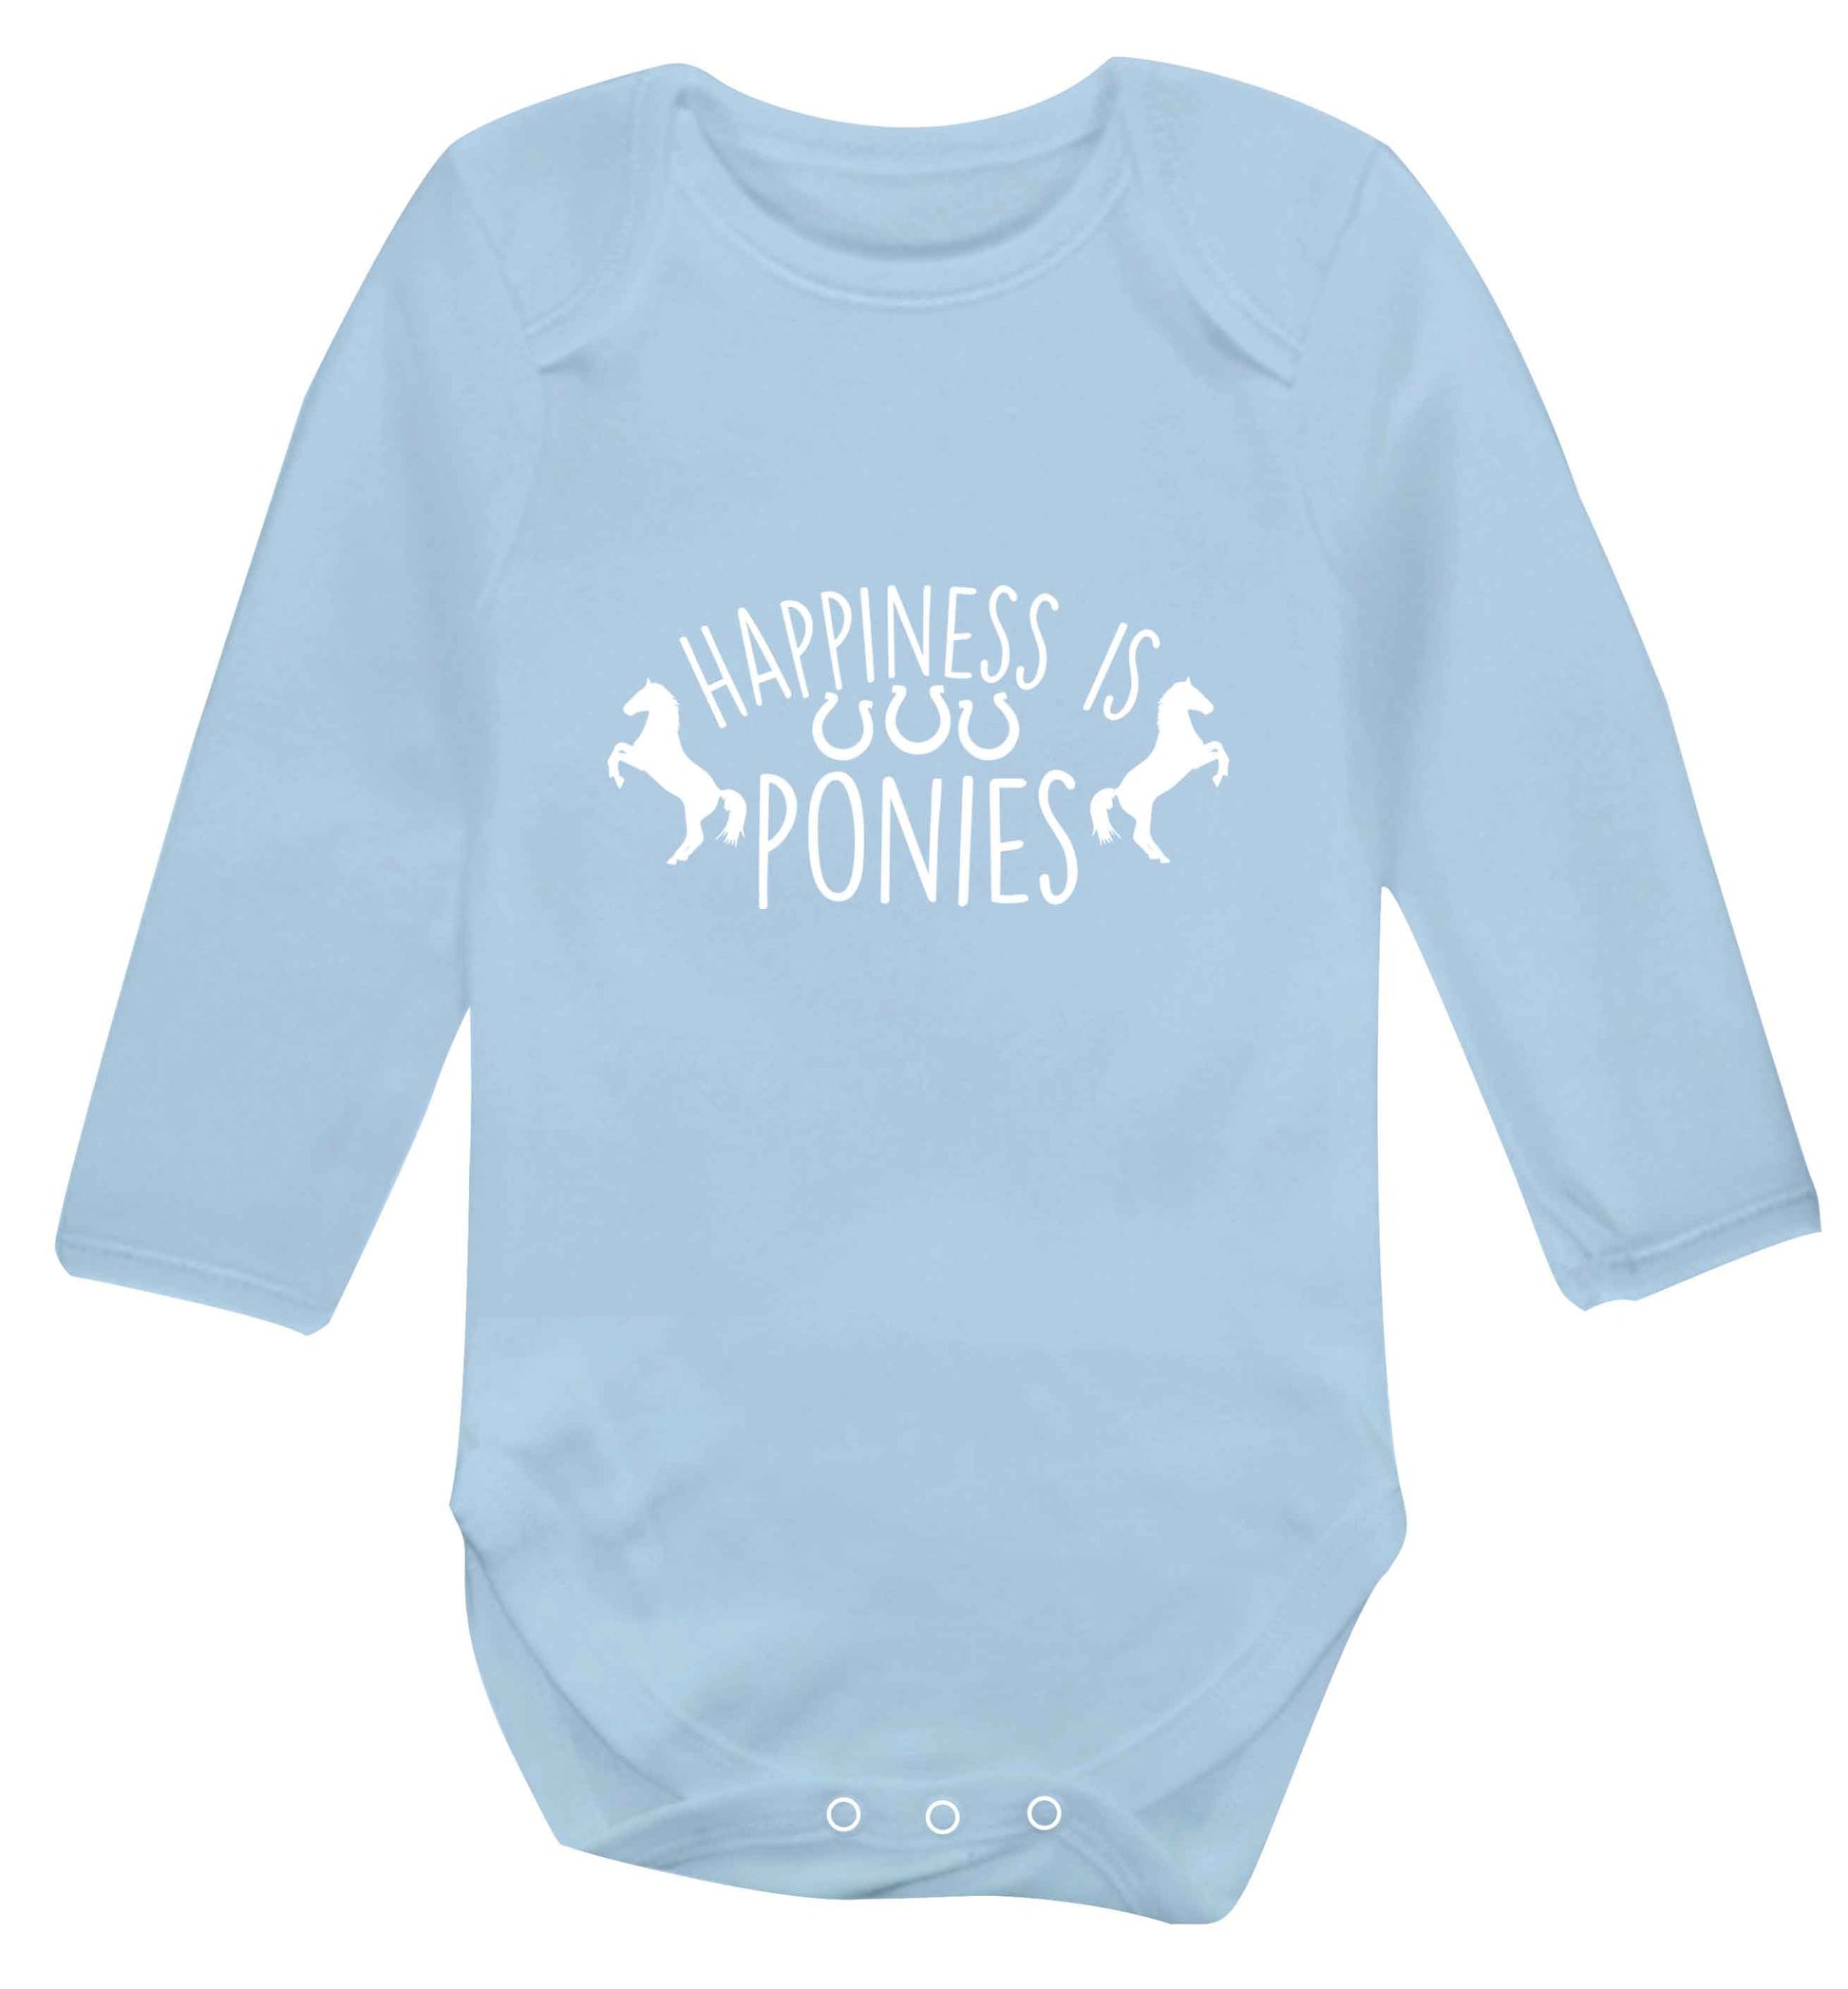 Happiness is ponies baby vest long sleeved pale blue 6-12 months